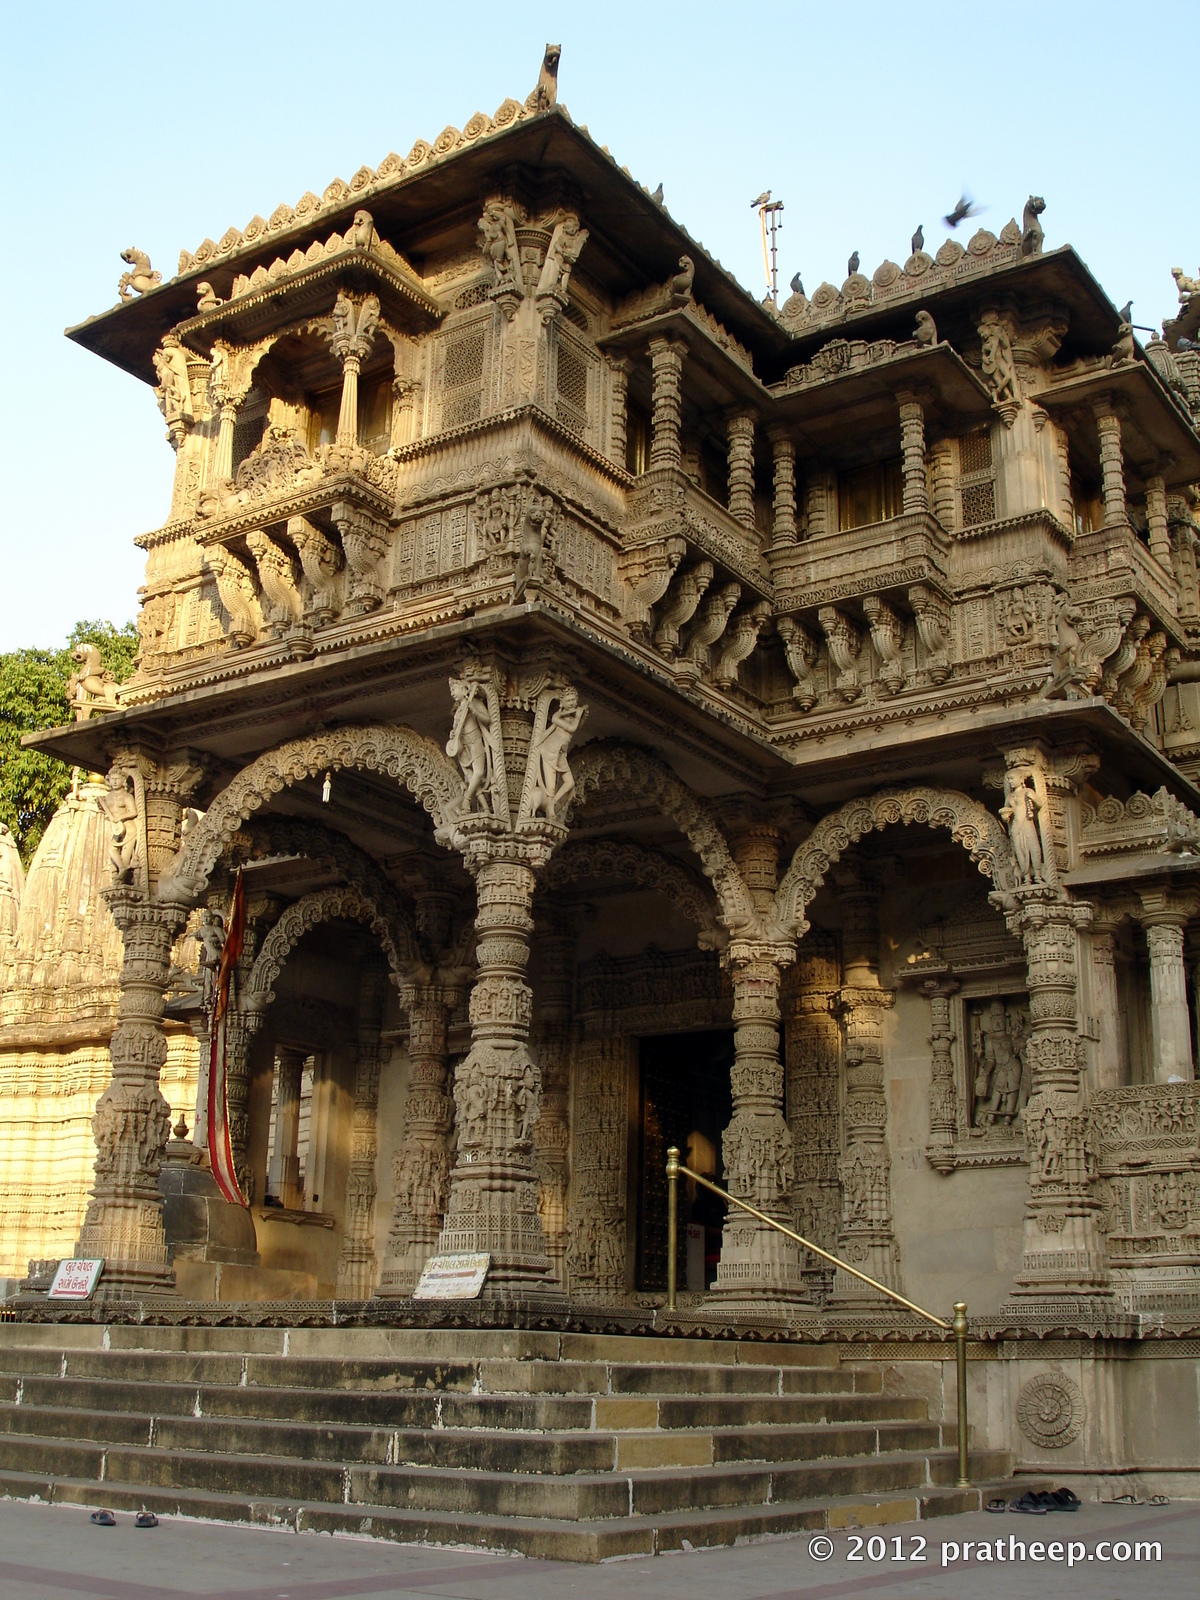 Built in 1848 by a wealthy Ahmedabad trader, this is the best known Jain temple in Ahmedabad city. 